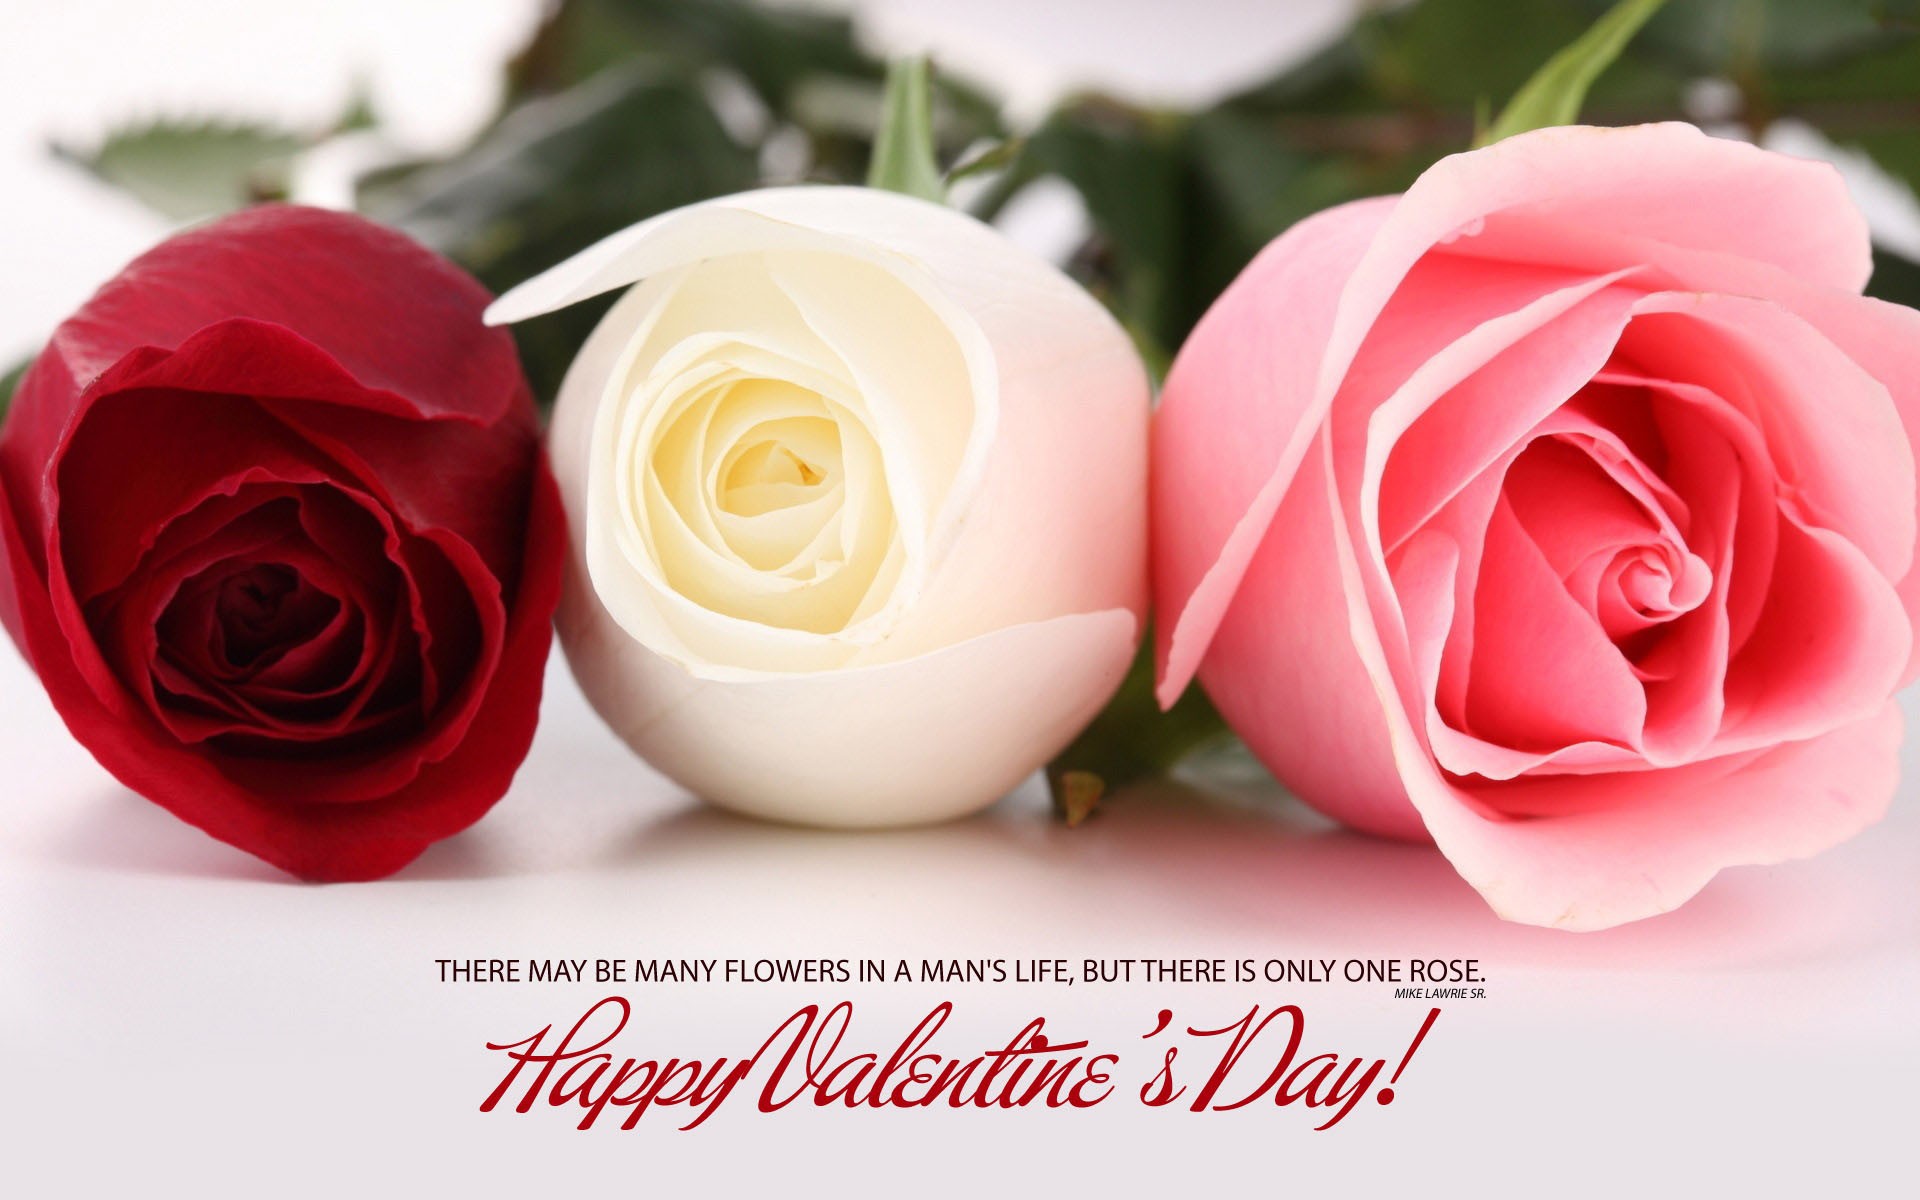 happy valentines day red white pink rose free awesome image for mobile